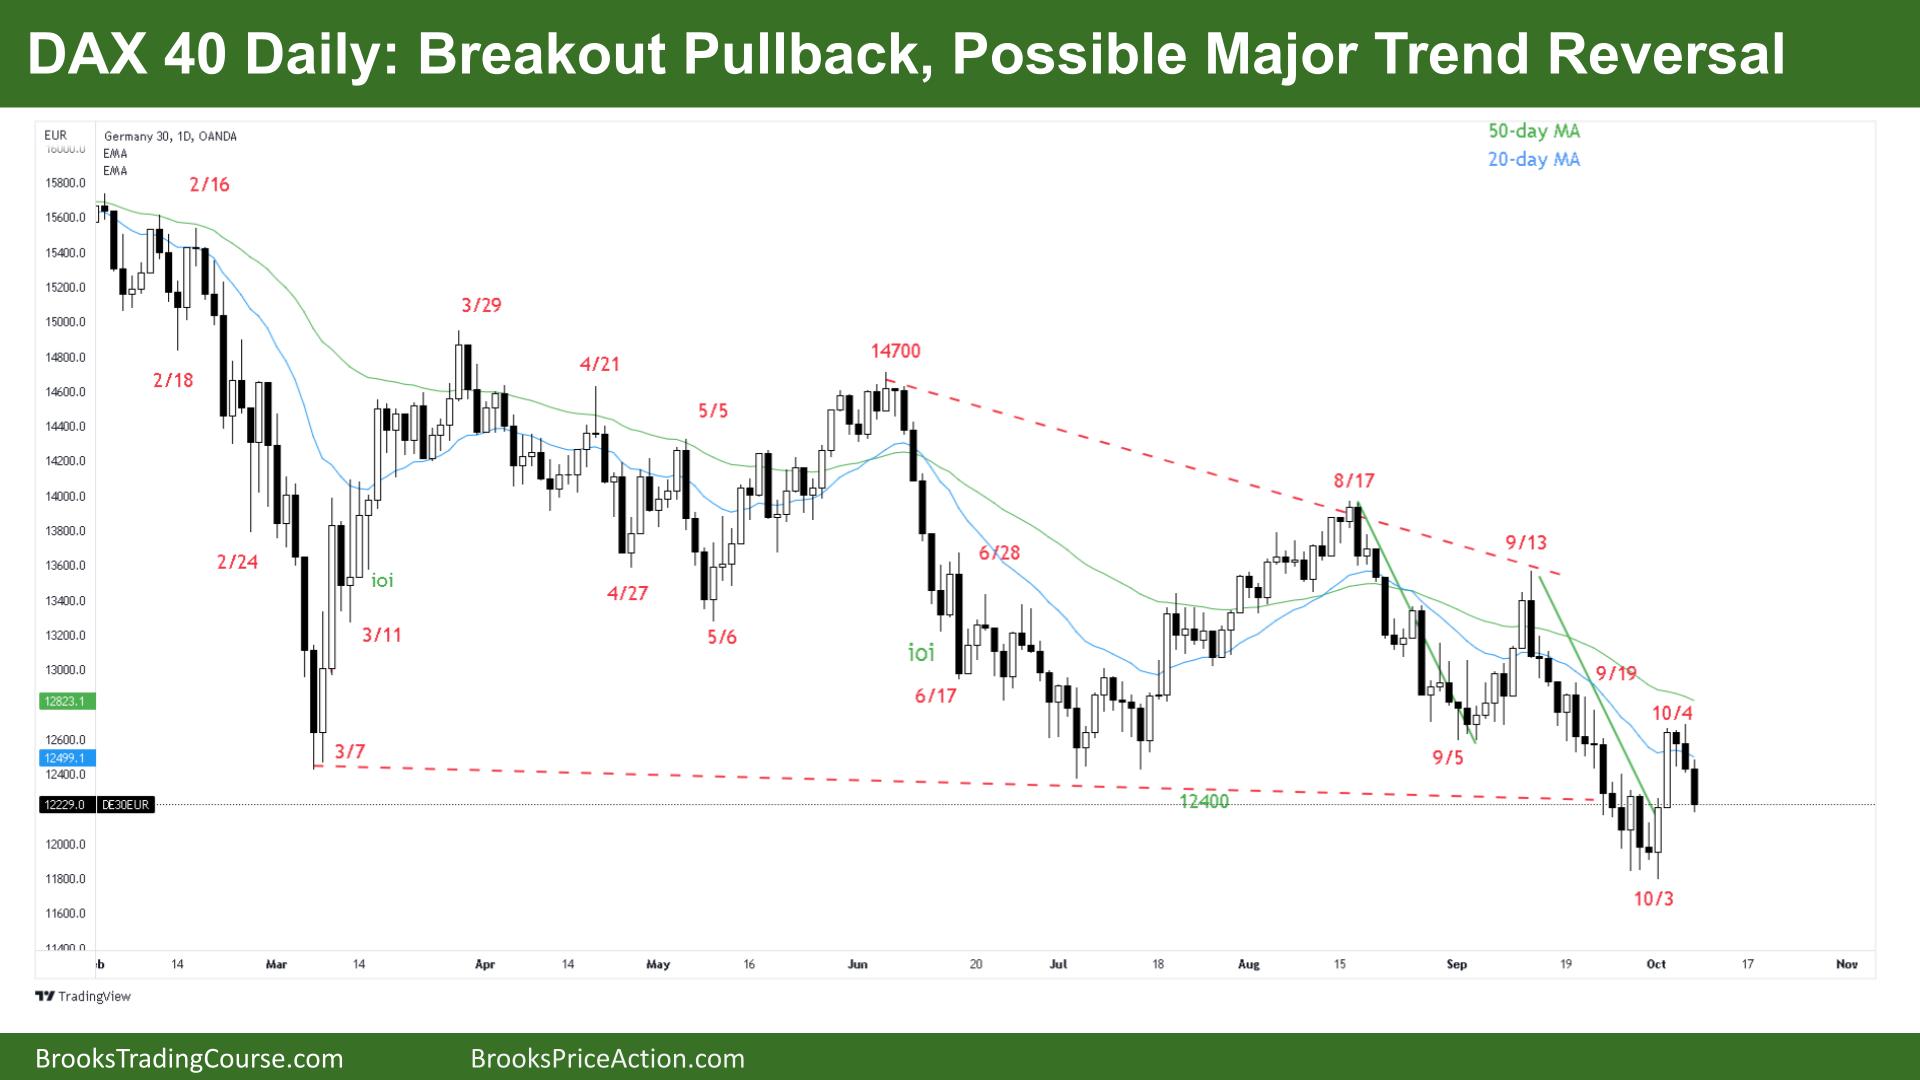 DAX 40 Daily Breakout Pullback, Possible Major Trend Reversal